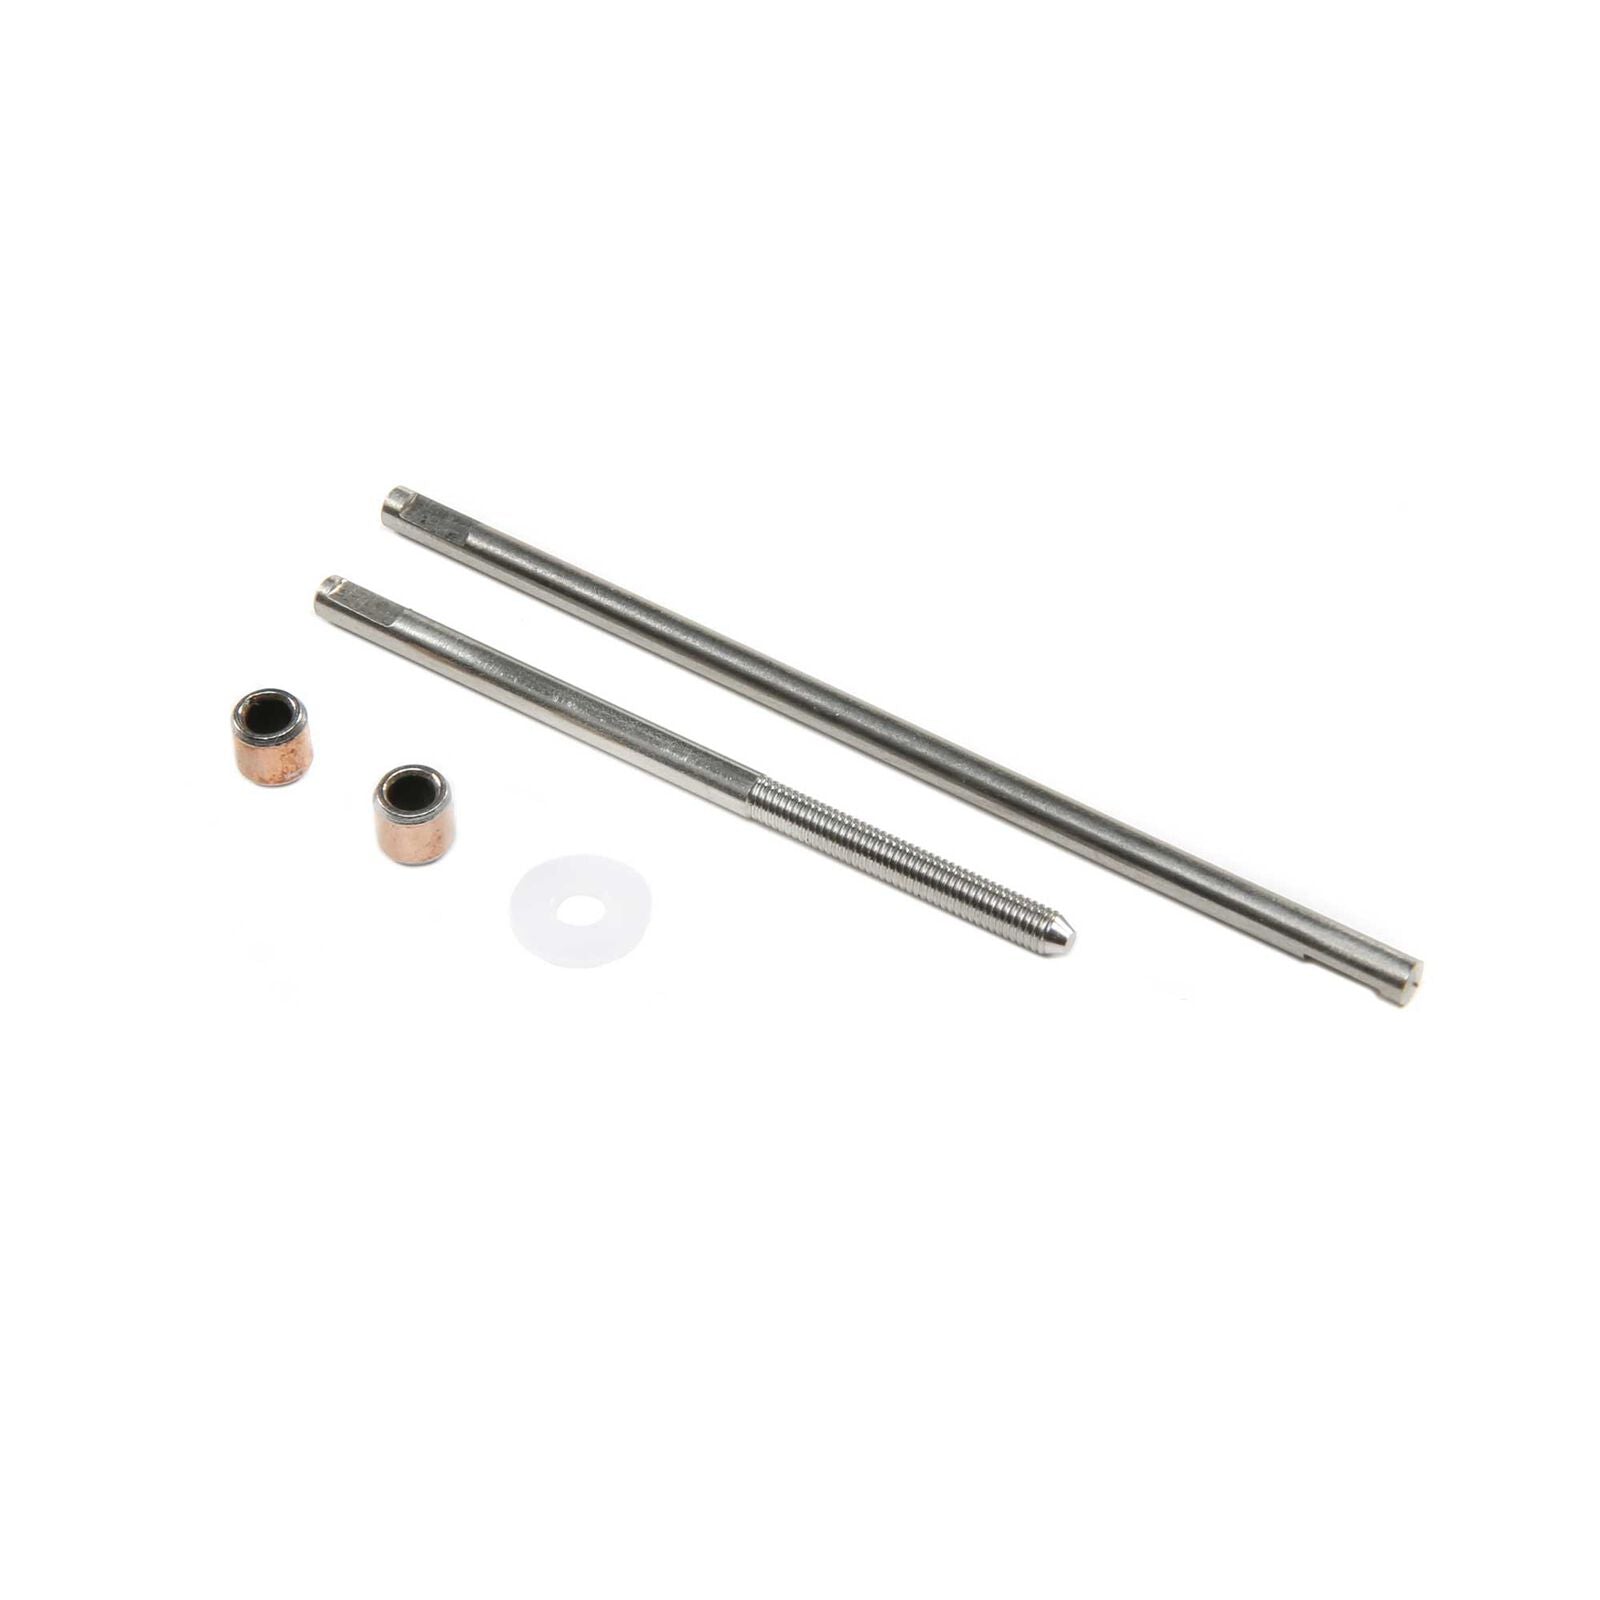 PROBOAT PRB282069 Drive Shafts: 17-inch Power Boat Racer